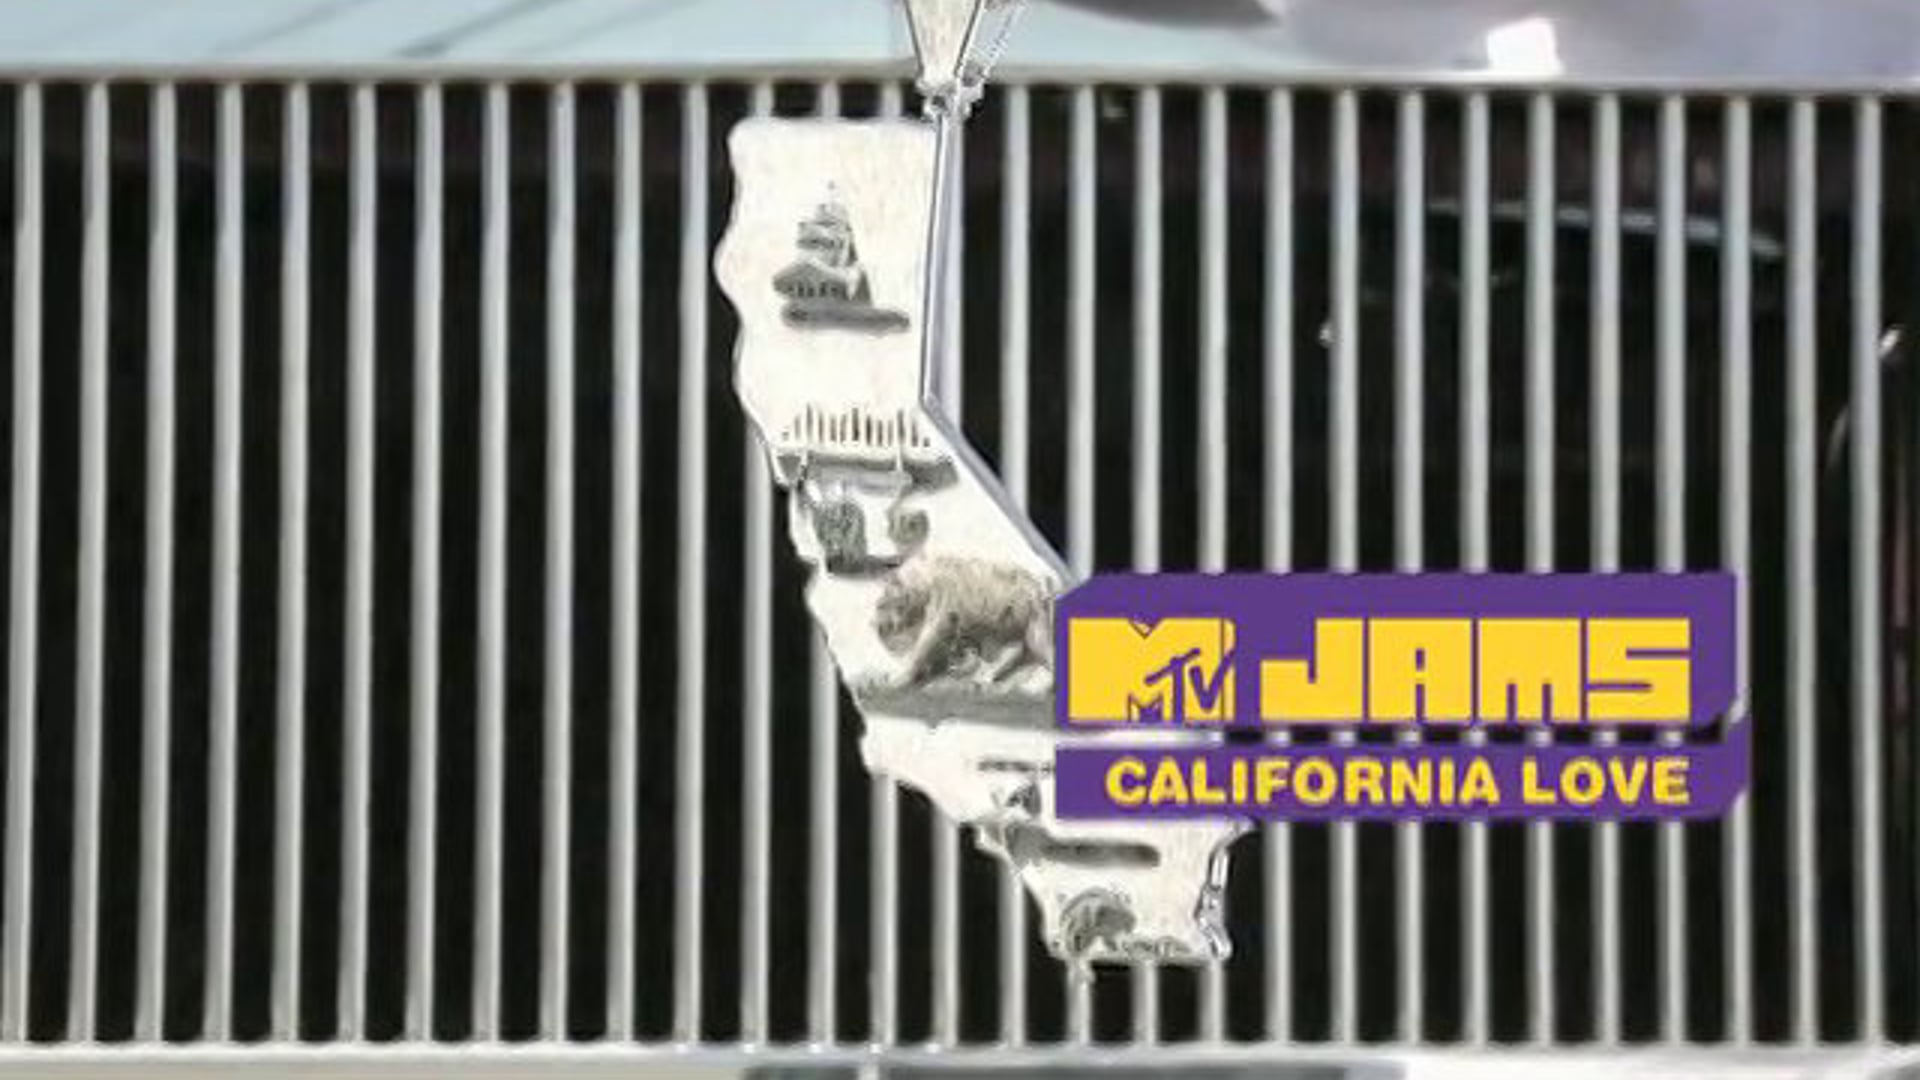 MTV JAMS "CALI DAY" OFFICIAL INTRO